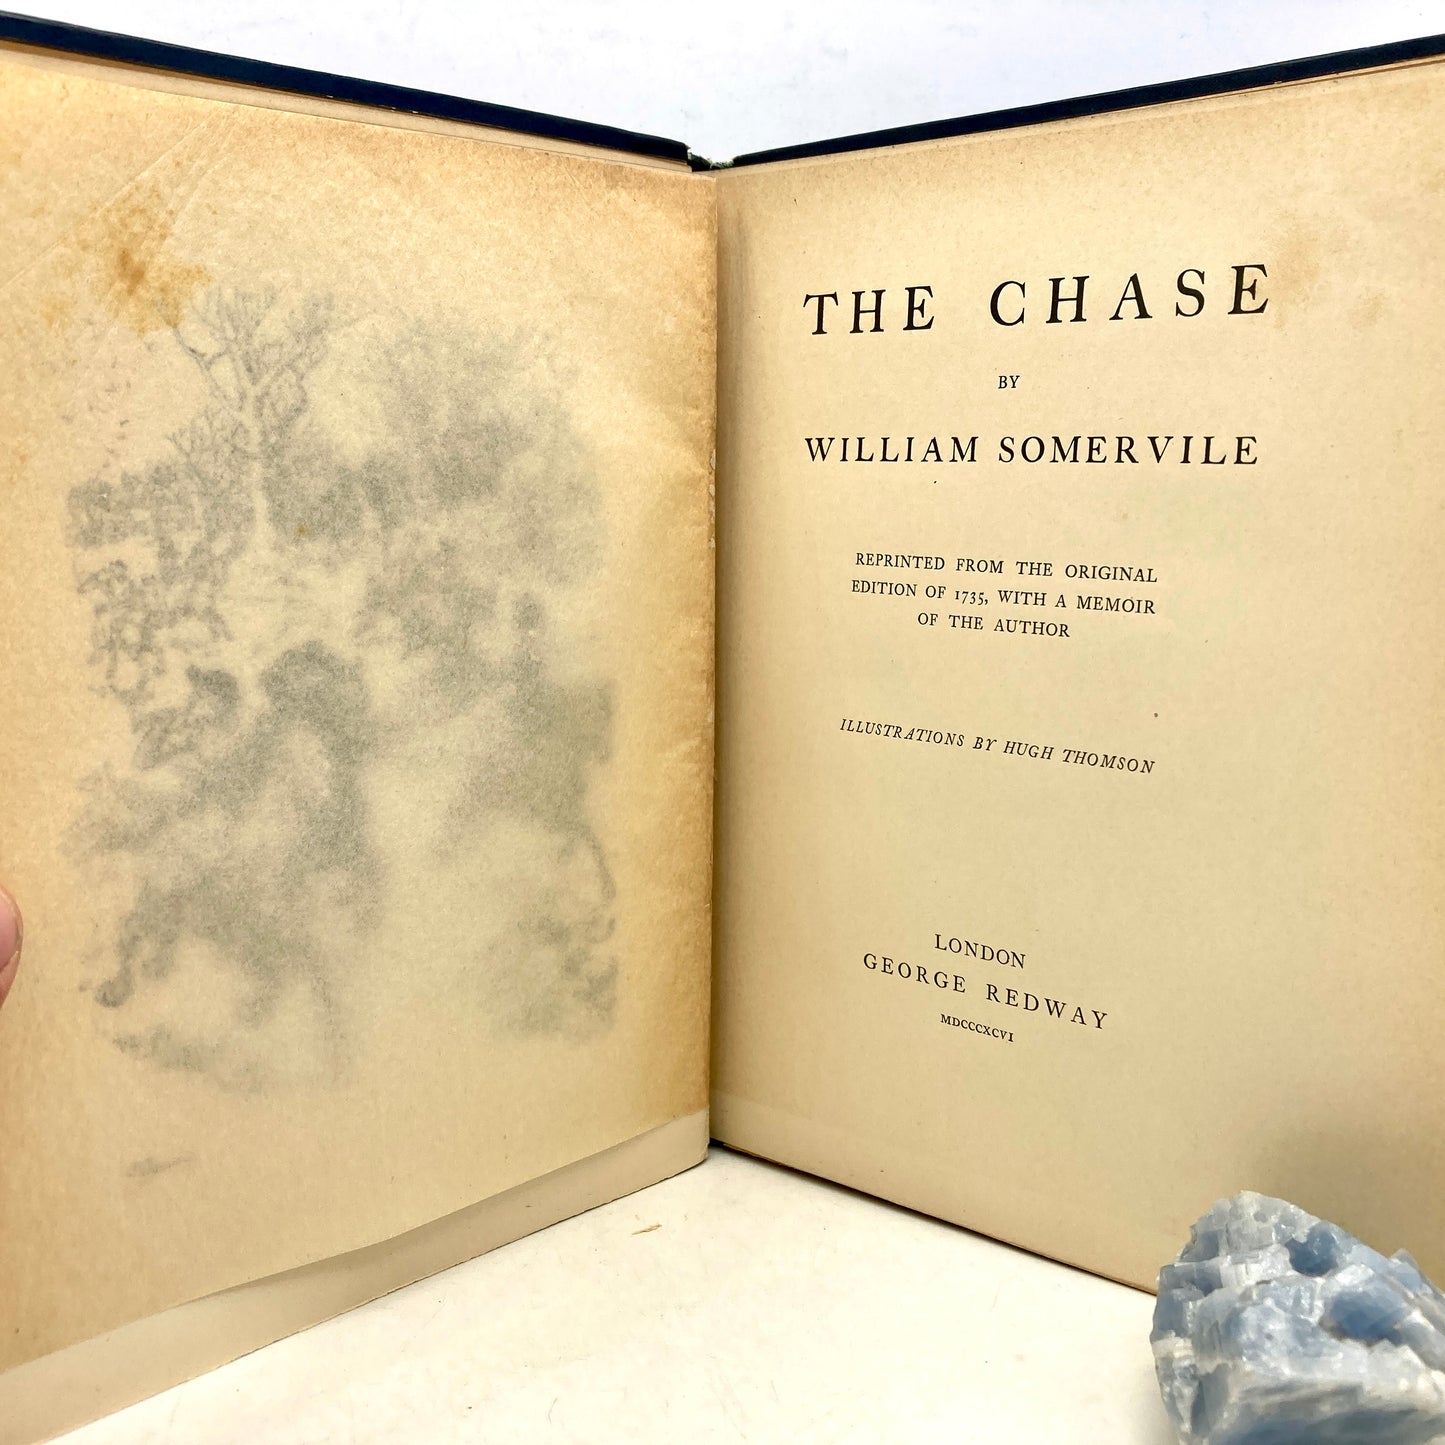 SOMERVILLE, William "The Chase" [George Redway, 1896] Hugh Thomson Illustrations